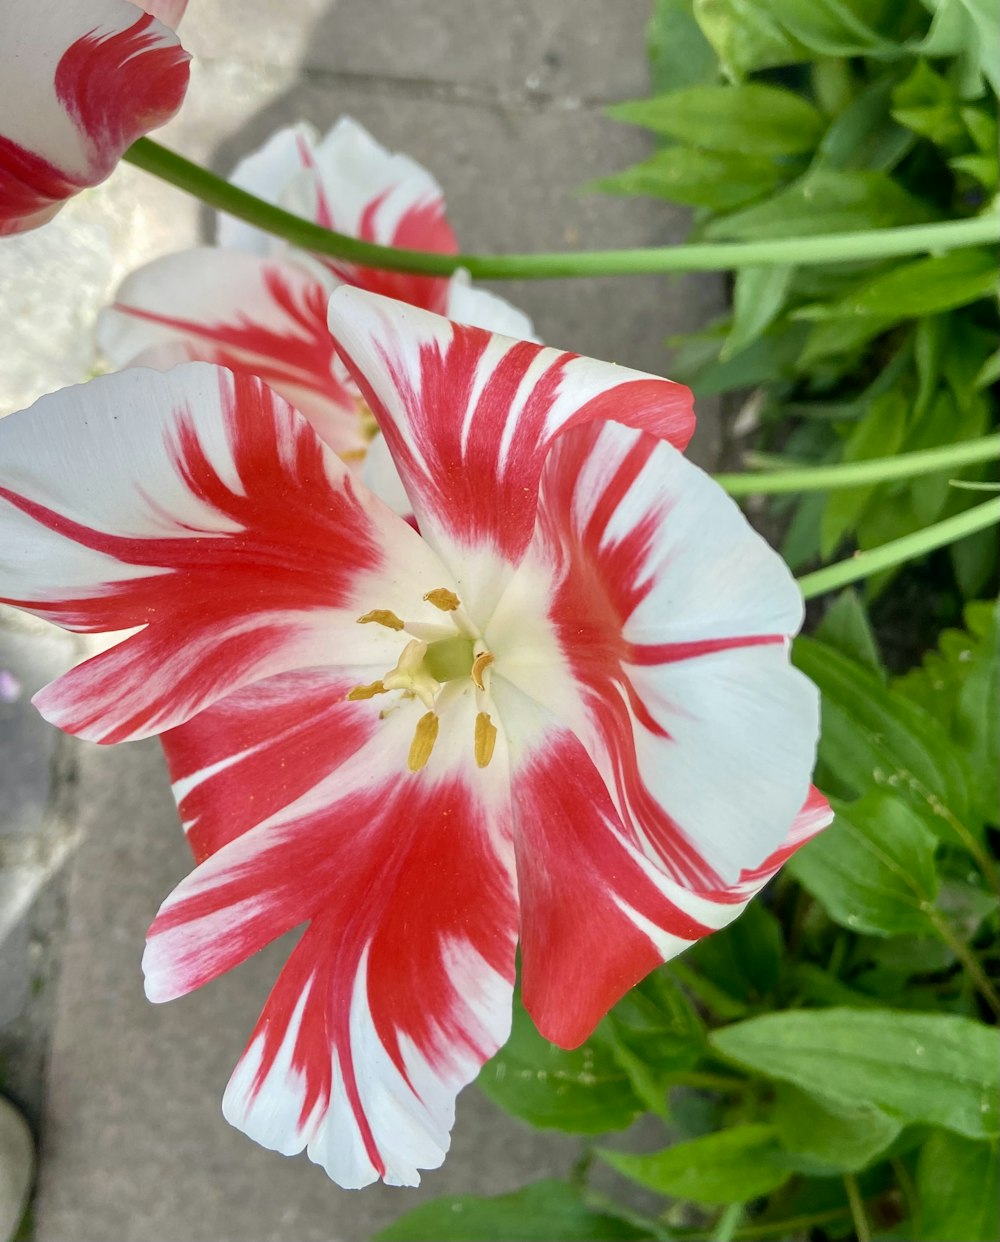 a close up of a red and white flower